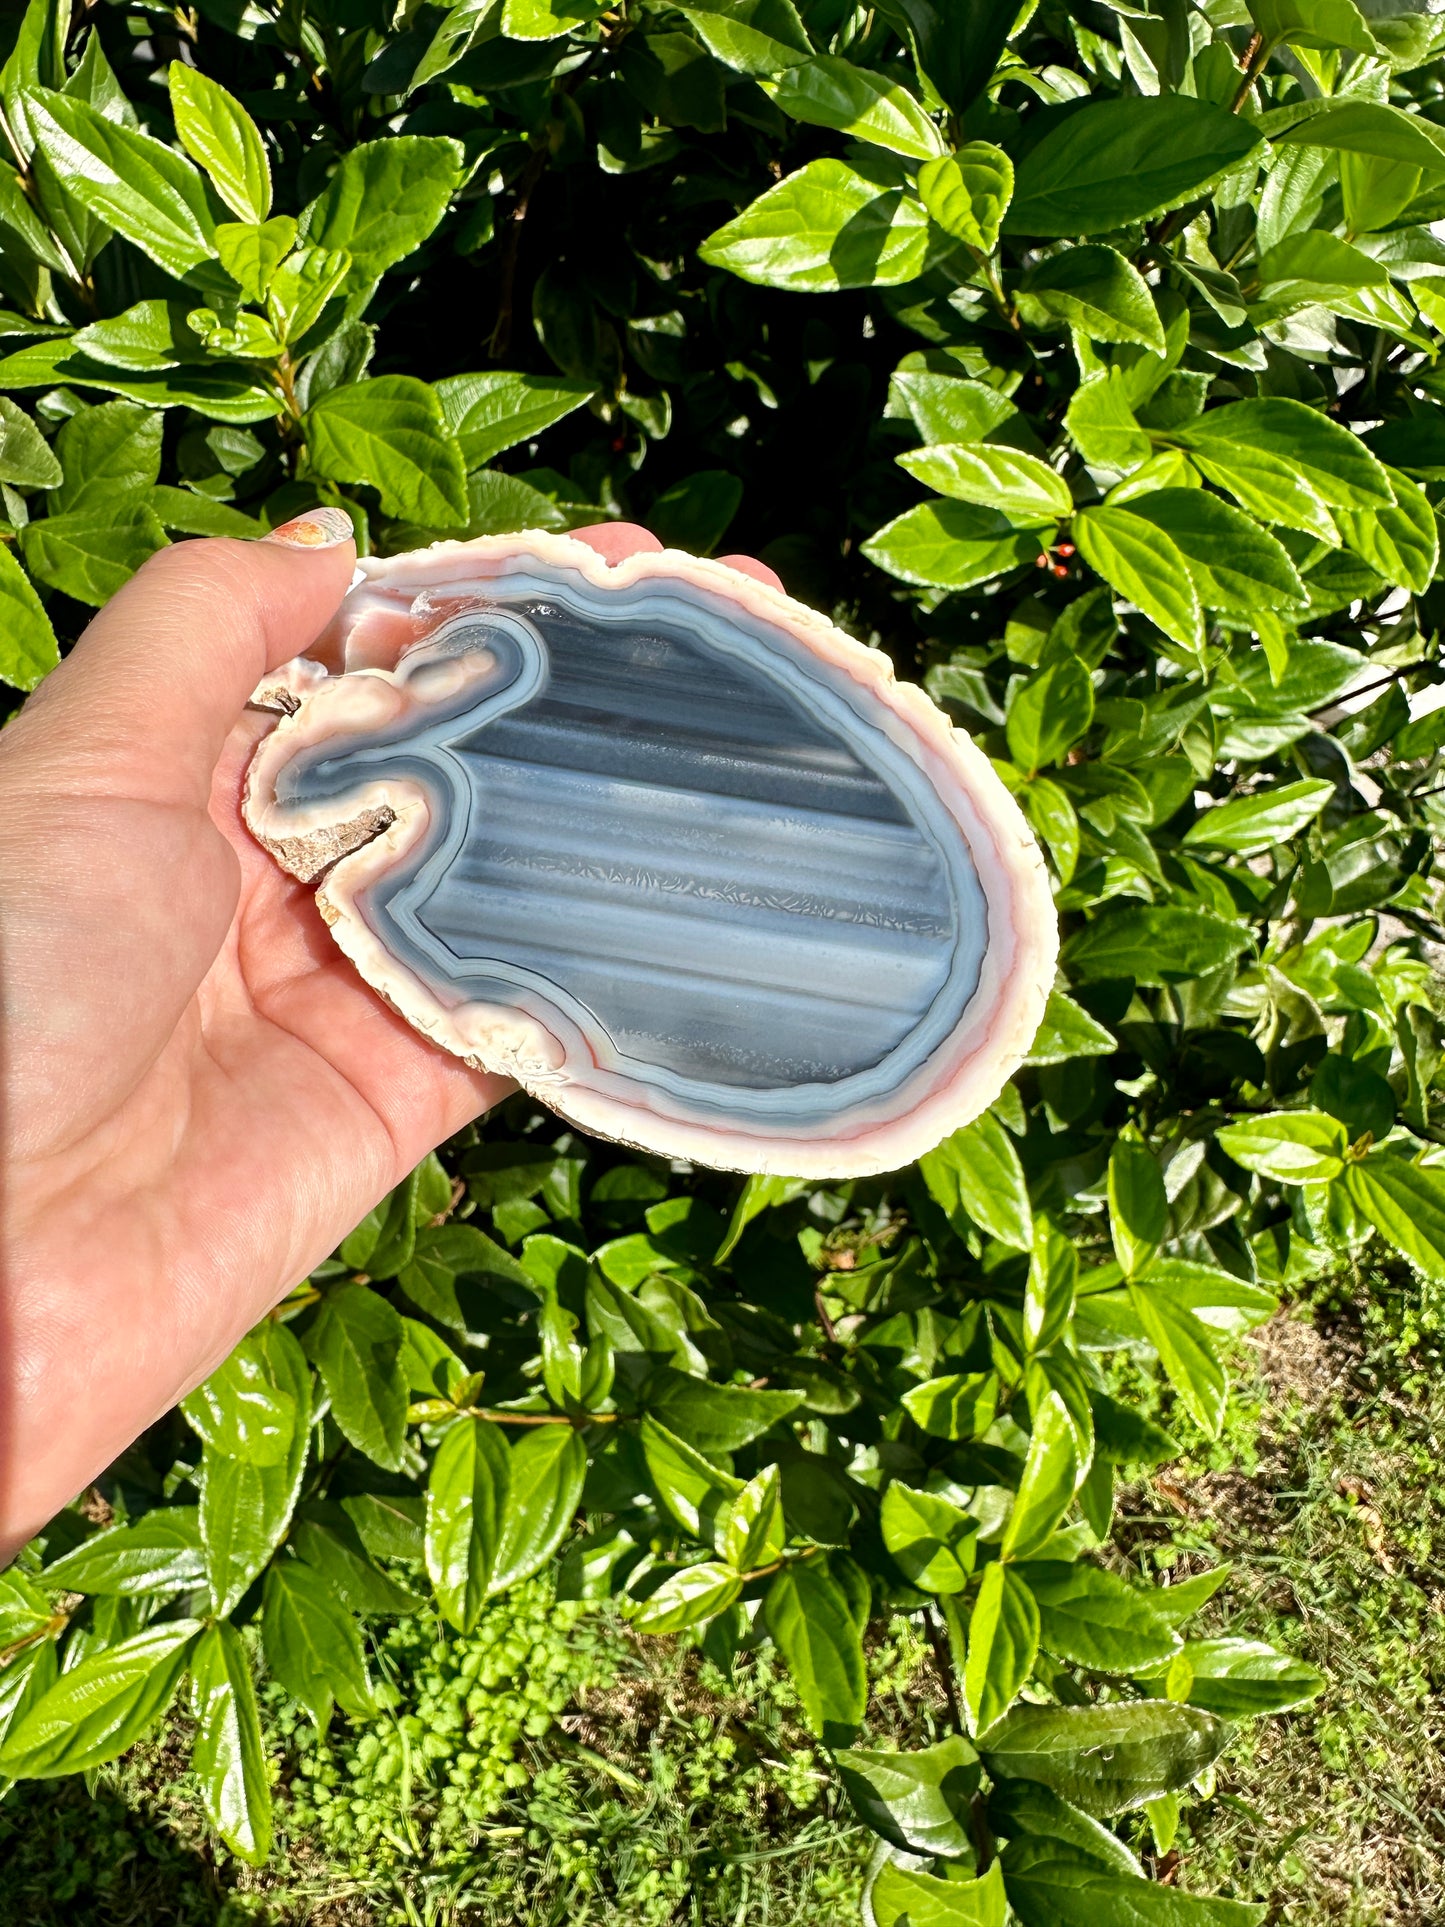 Stunning Agate Druzy Slab - Enhance Your Home with Natural Sparkle, Perfect for Collectors and Feng Shui Enthusiasts